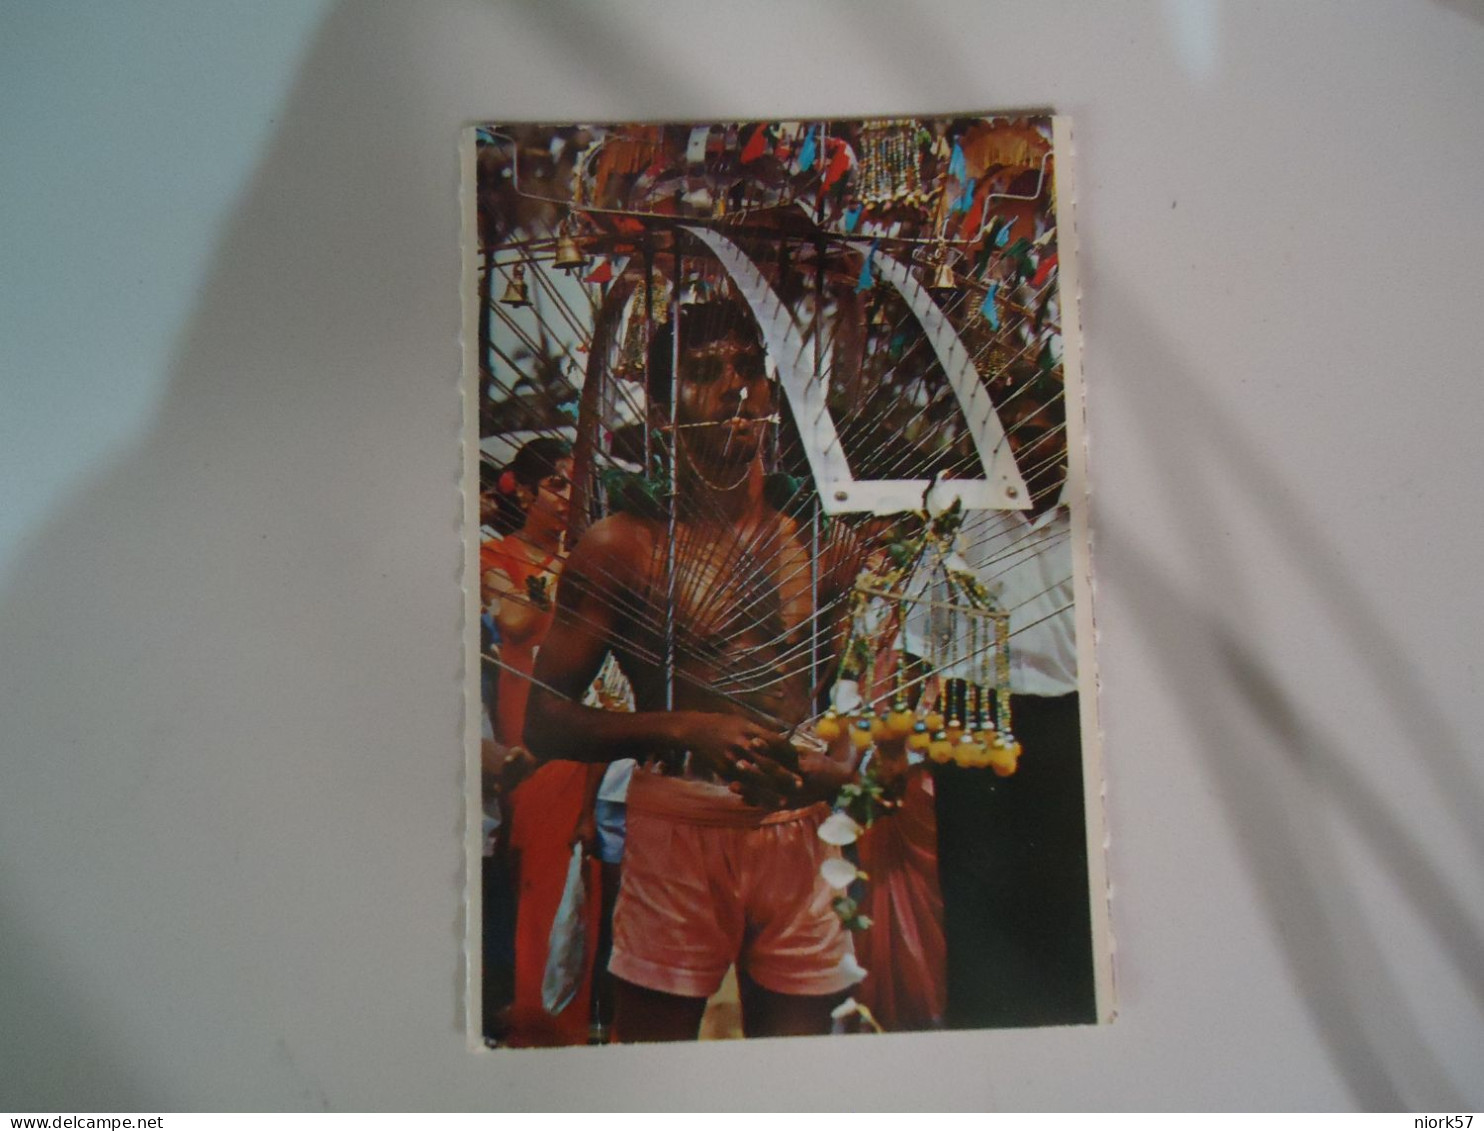 SINGAPORE POSTCARDS   SMALL KEVADA CARRYING HINDU DEVETES     FOR MORE PURCHASES 10% DISCOUNT - Singapur